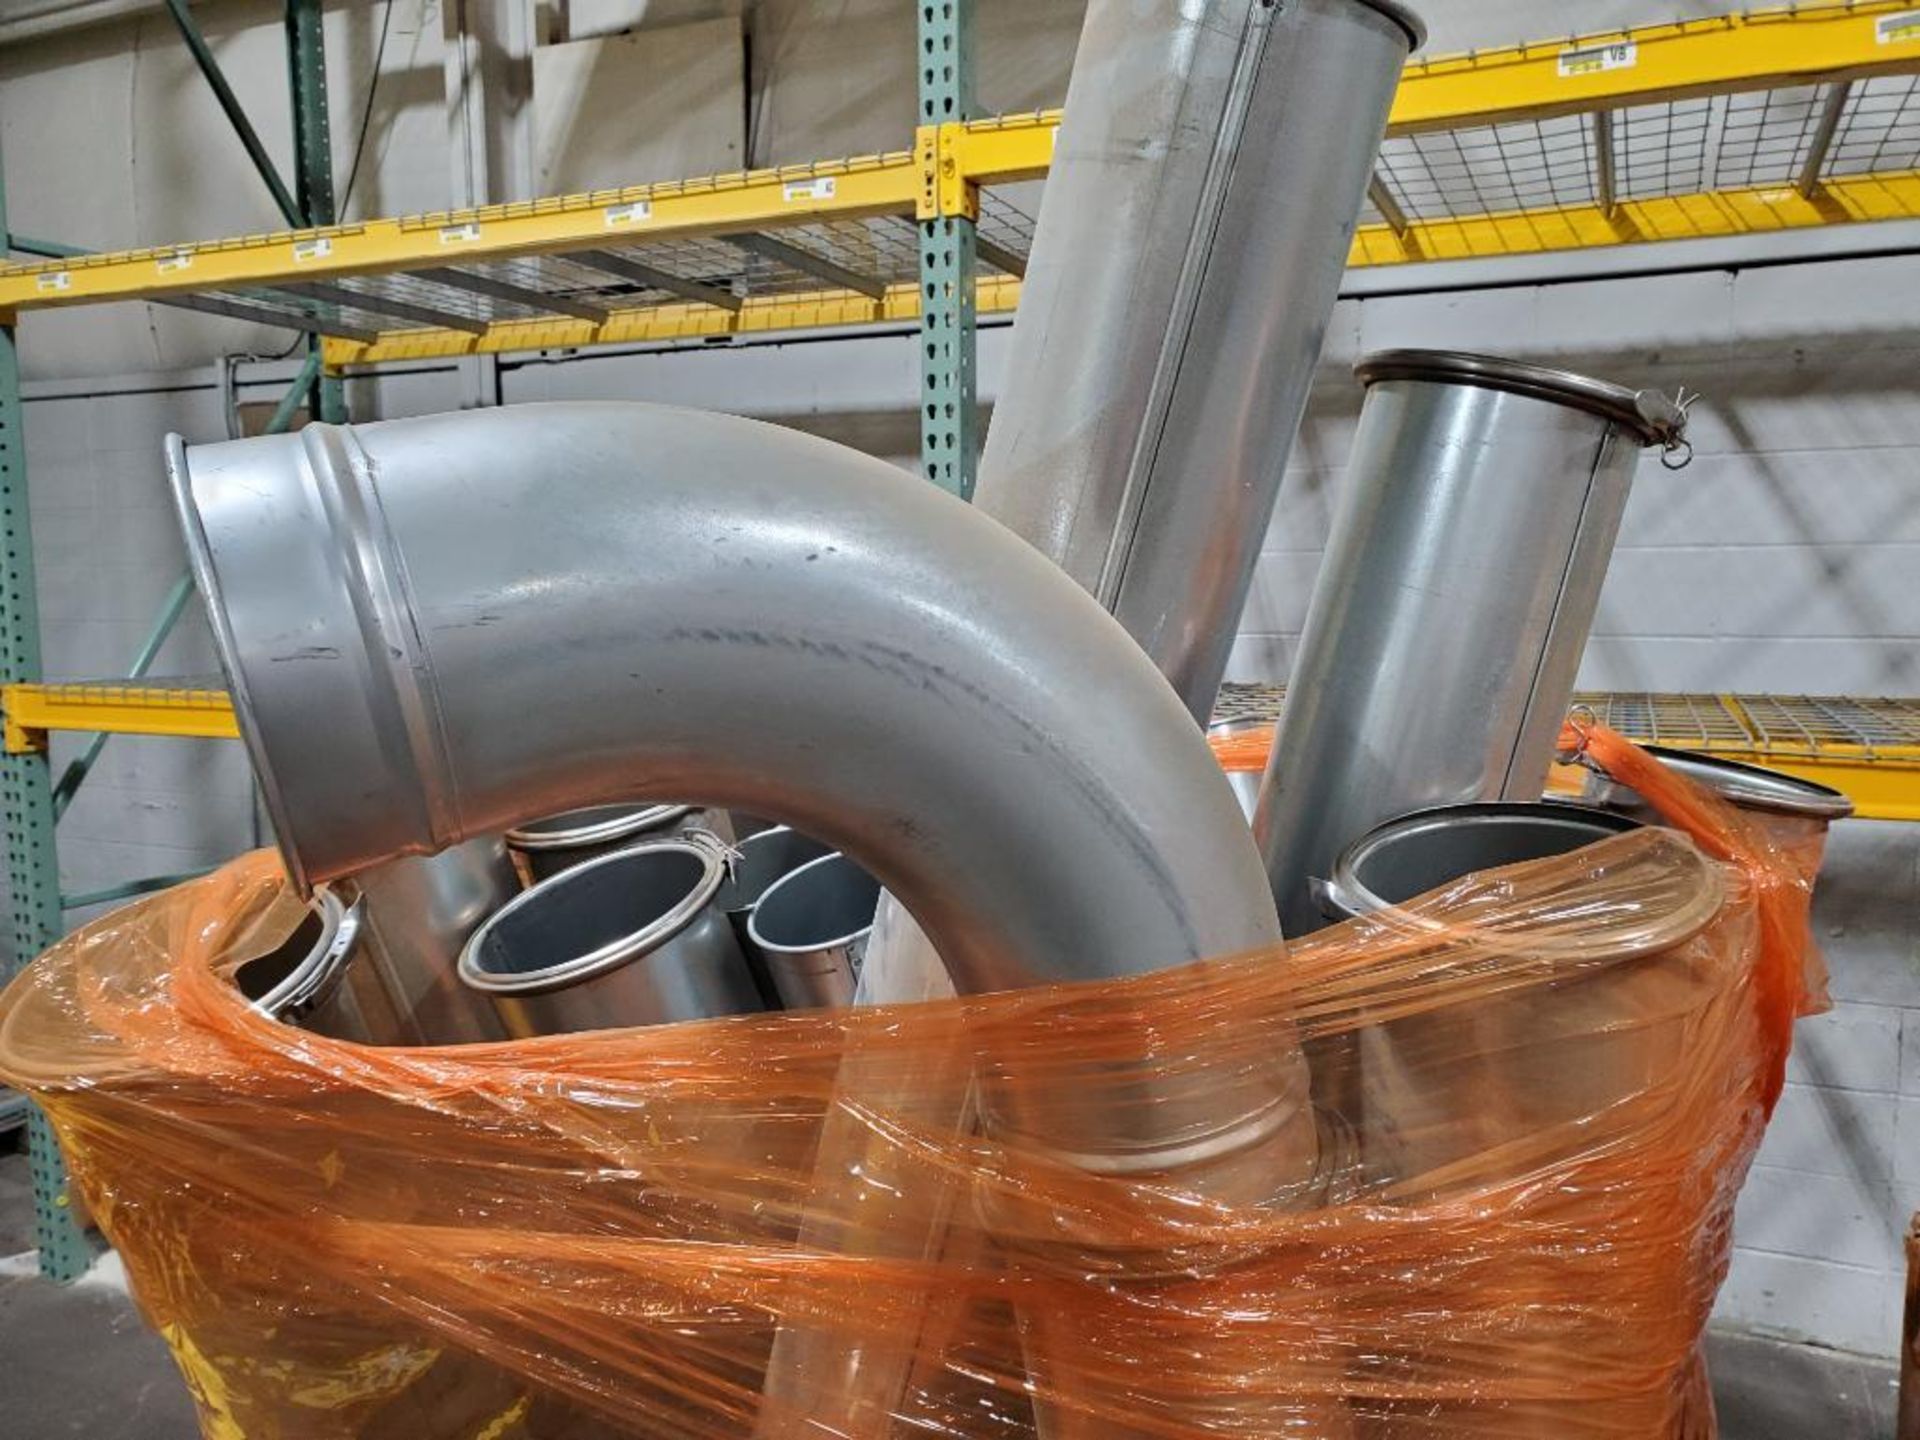 23 pieces of dust collector ducting. Quick connect style flanges. 76" longest piece. - Image 3 of 5